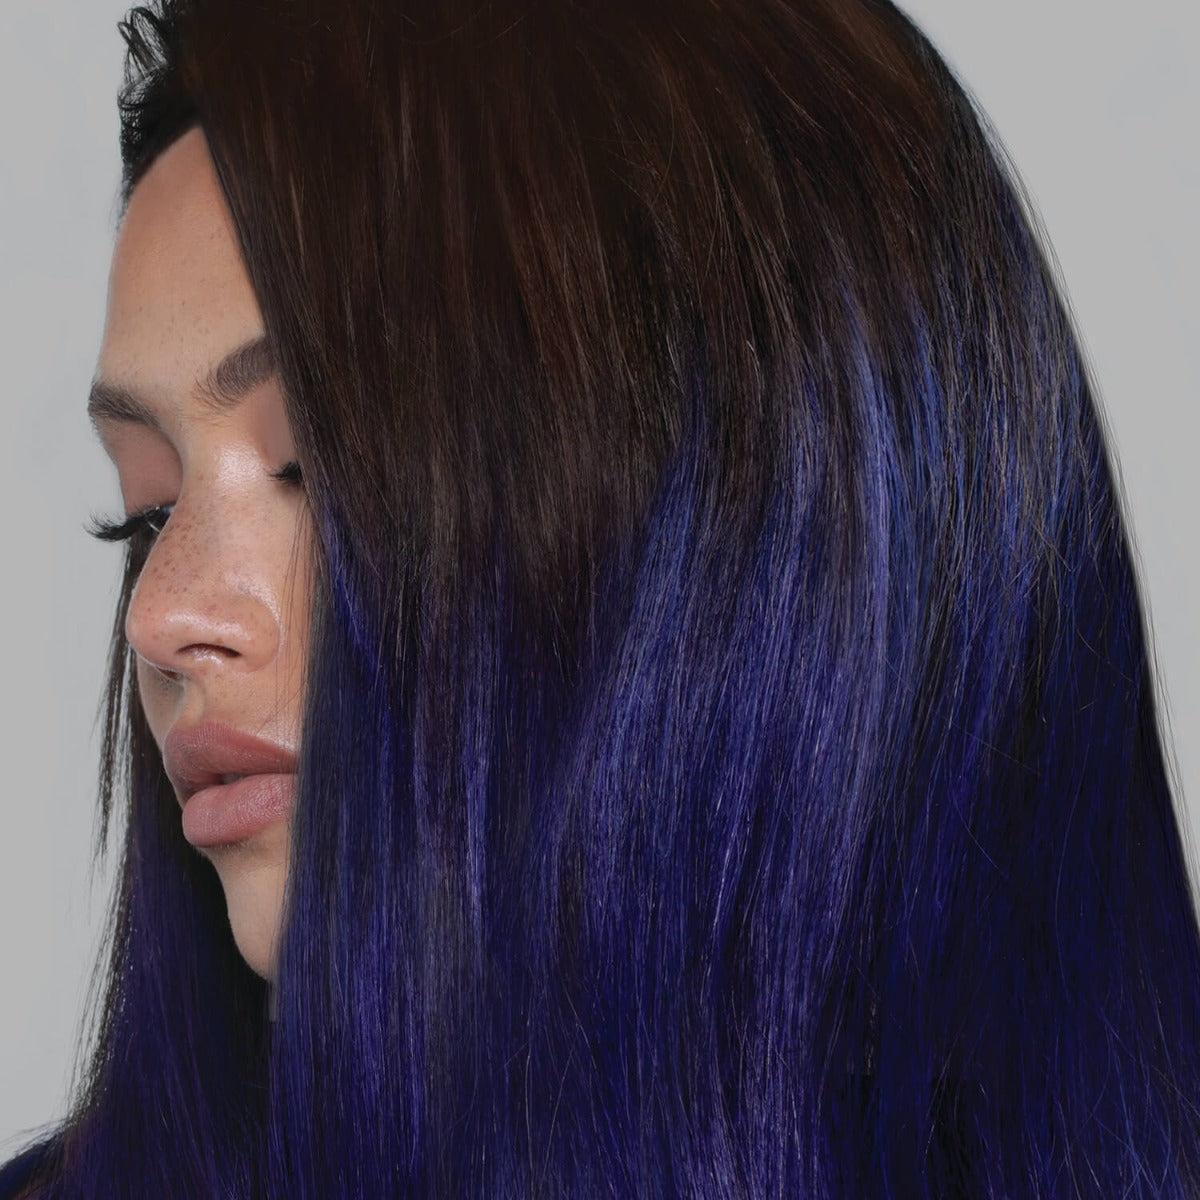 A photo of a model wearing Splat Hair Color's Blueberry Hair Dye